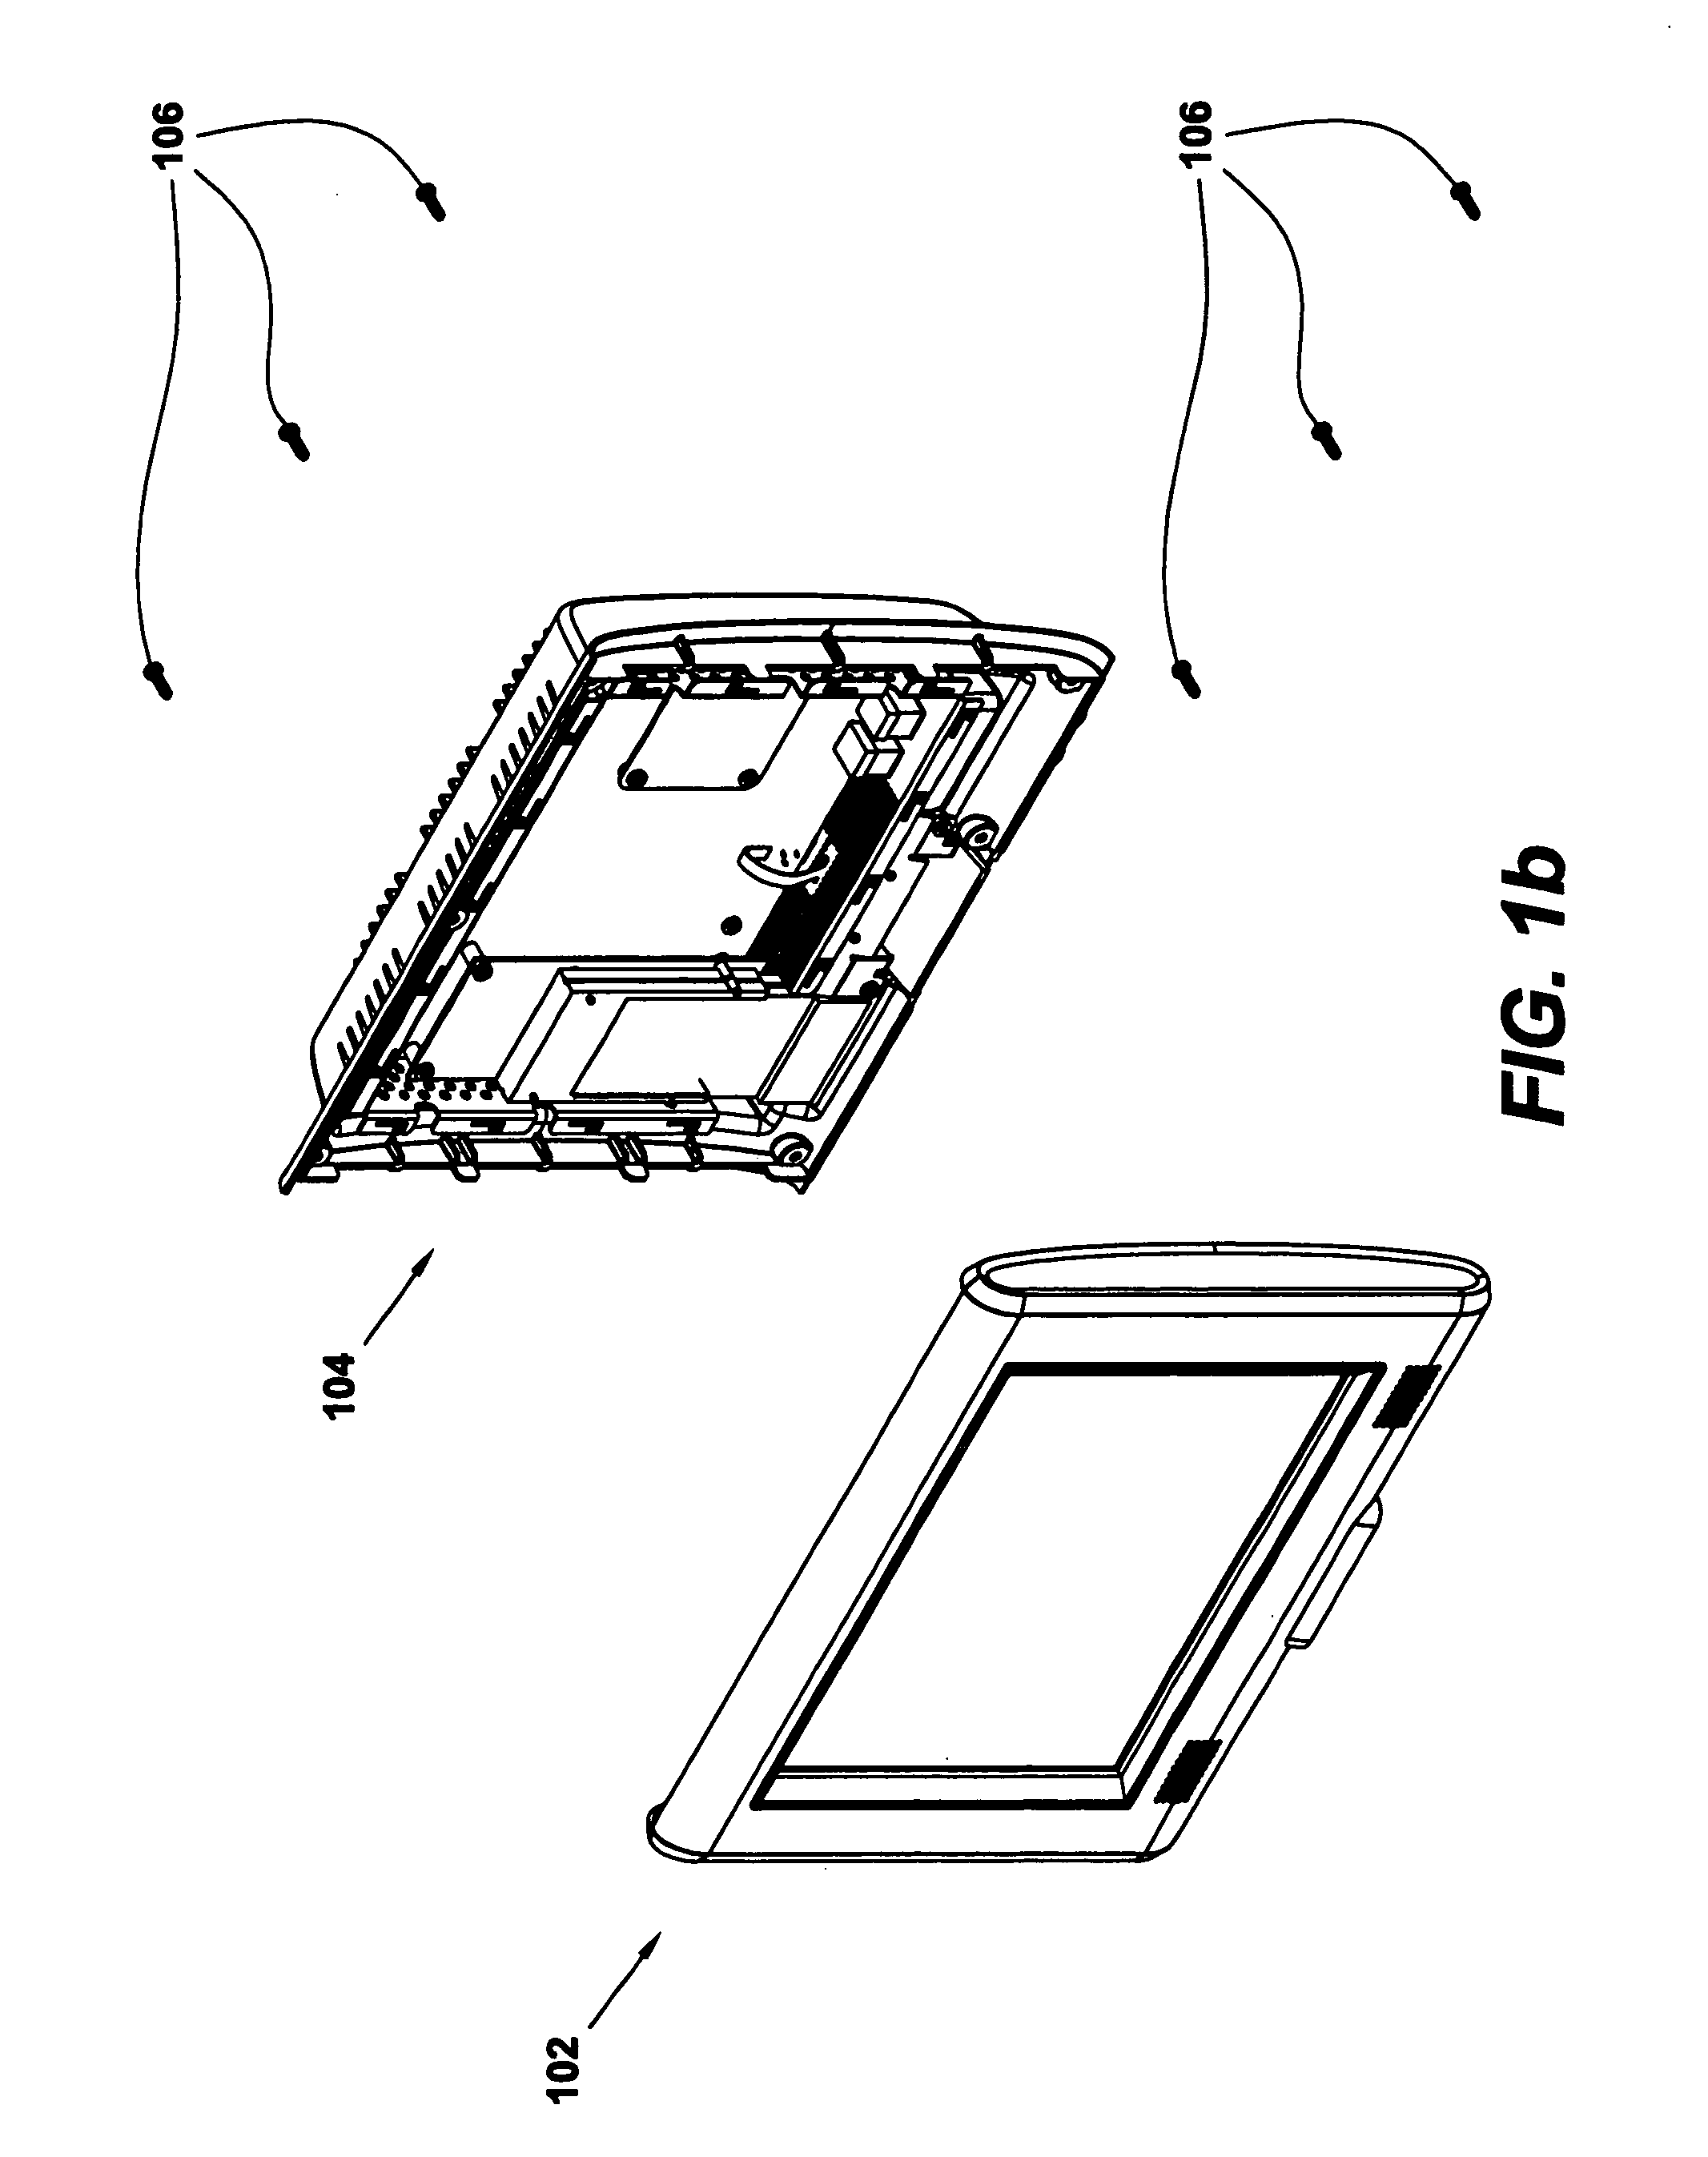 Fanless computer with integrated display